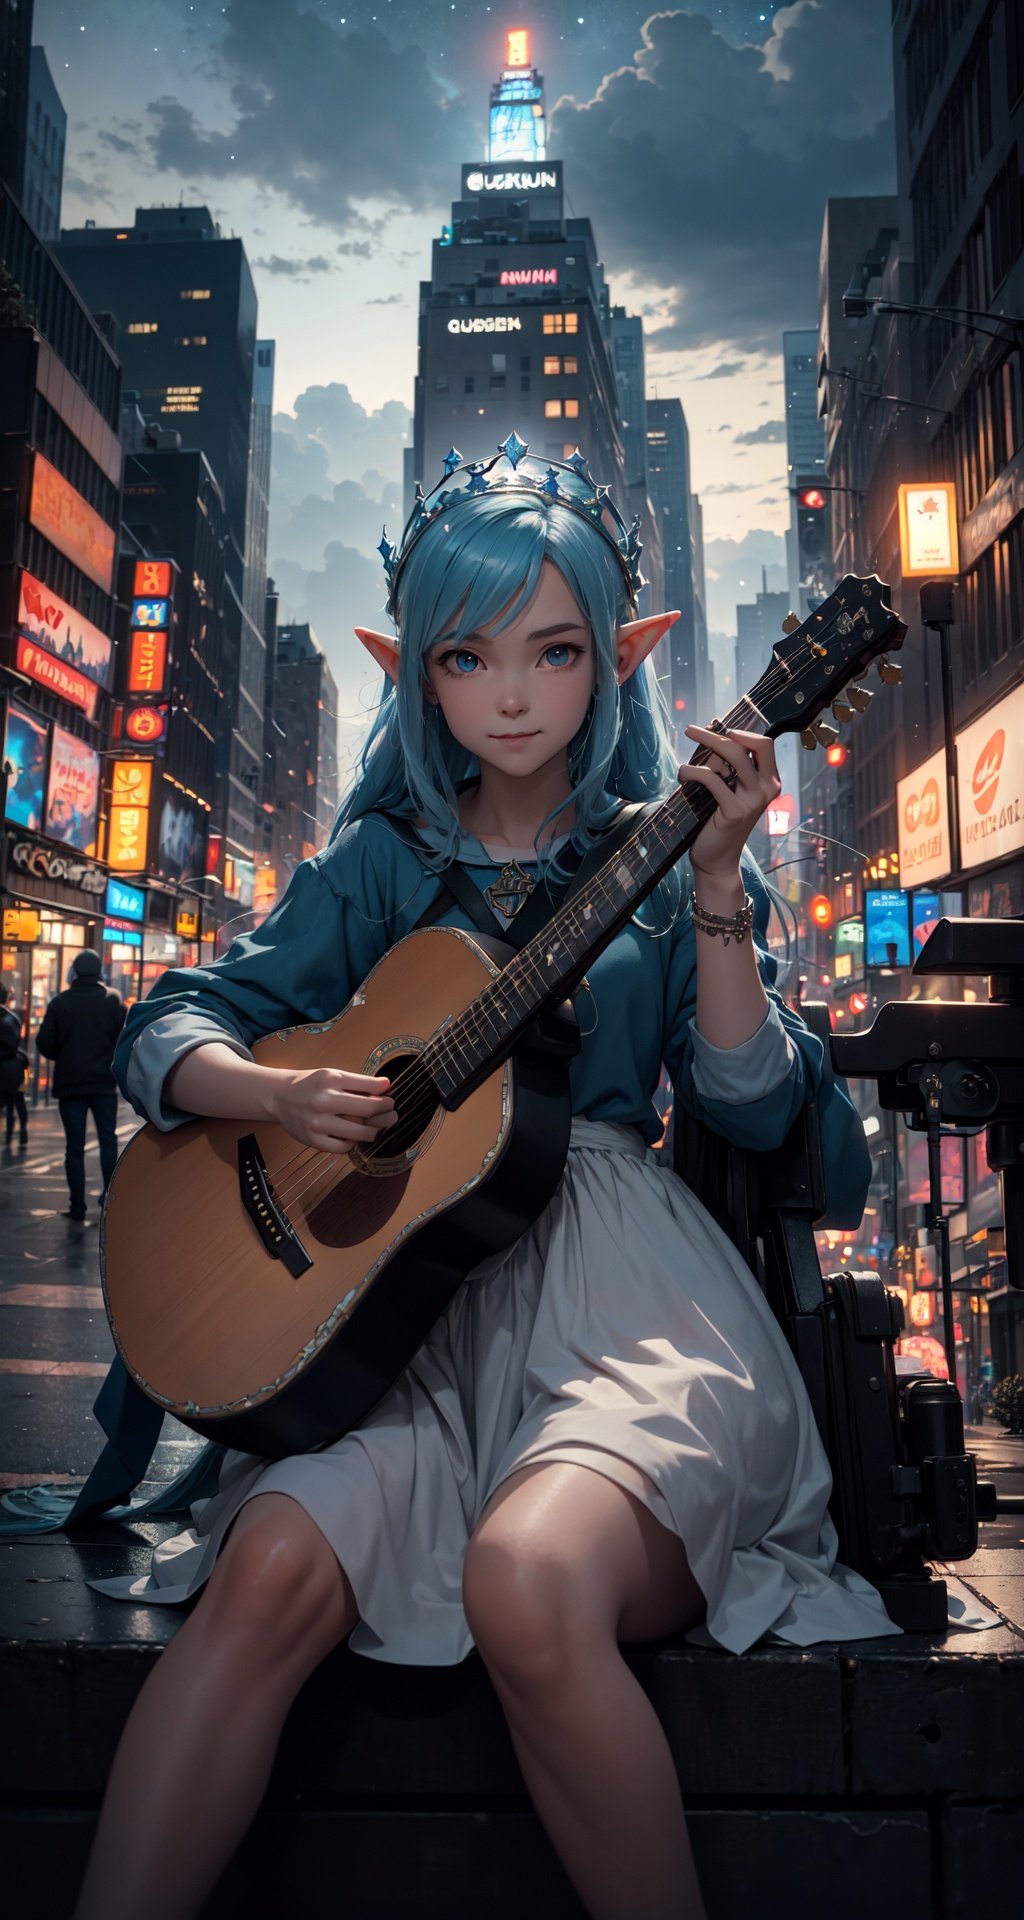 masterpiece, best quality, the cloud elf queen busks on the streets of new york, casual, sitting, playing guitar, dark moody lighting, night sky, night, starry sky, glittering, dark, (smile:0.8)